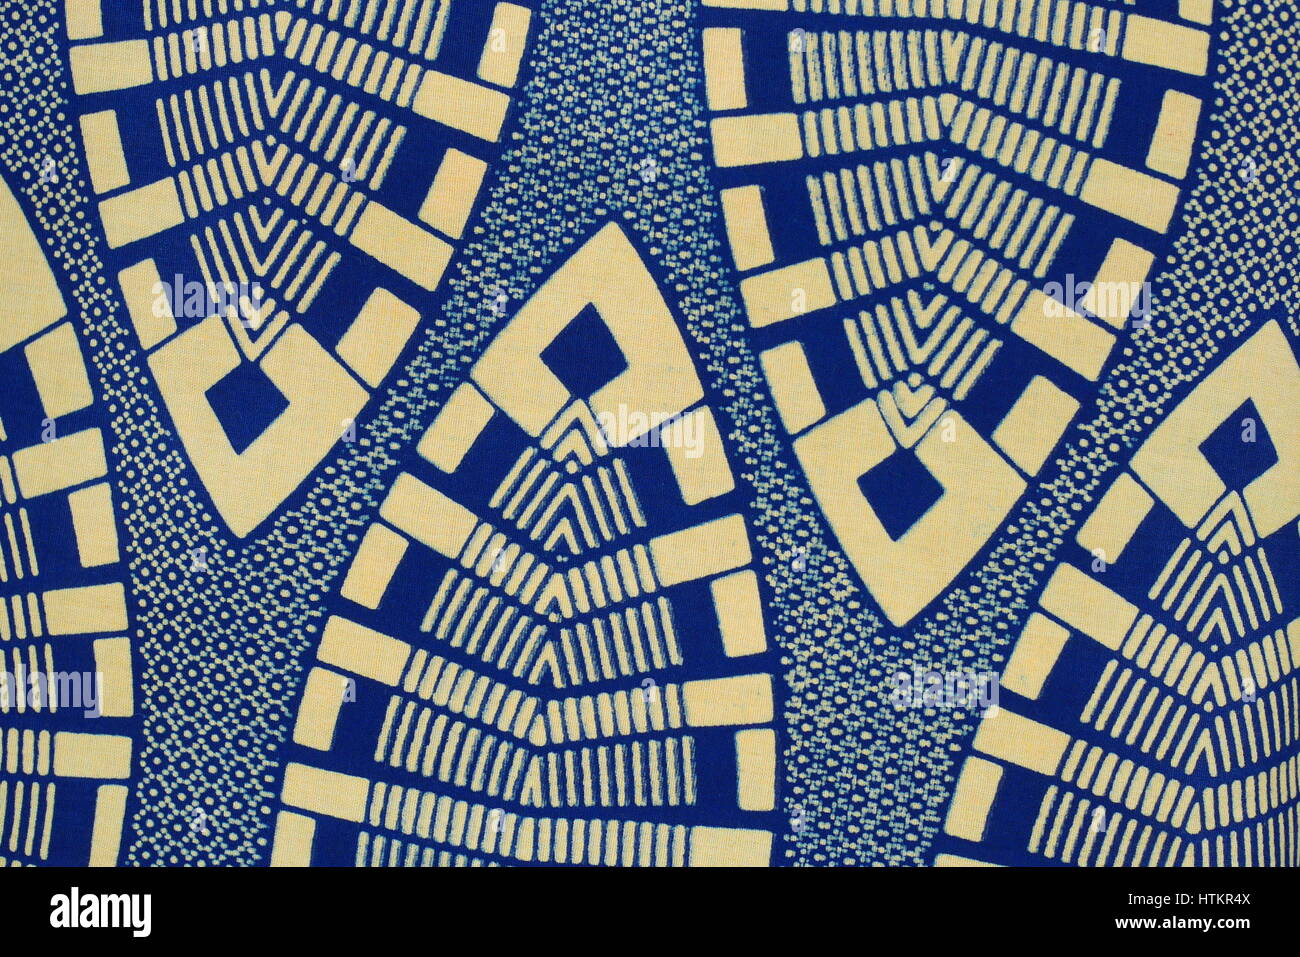 Tanzanian patterned kitenge fabric, the printing is done using a traditional batik technique. Stock Photo